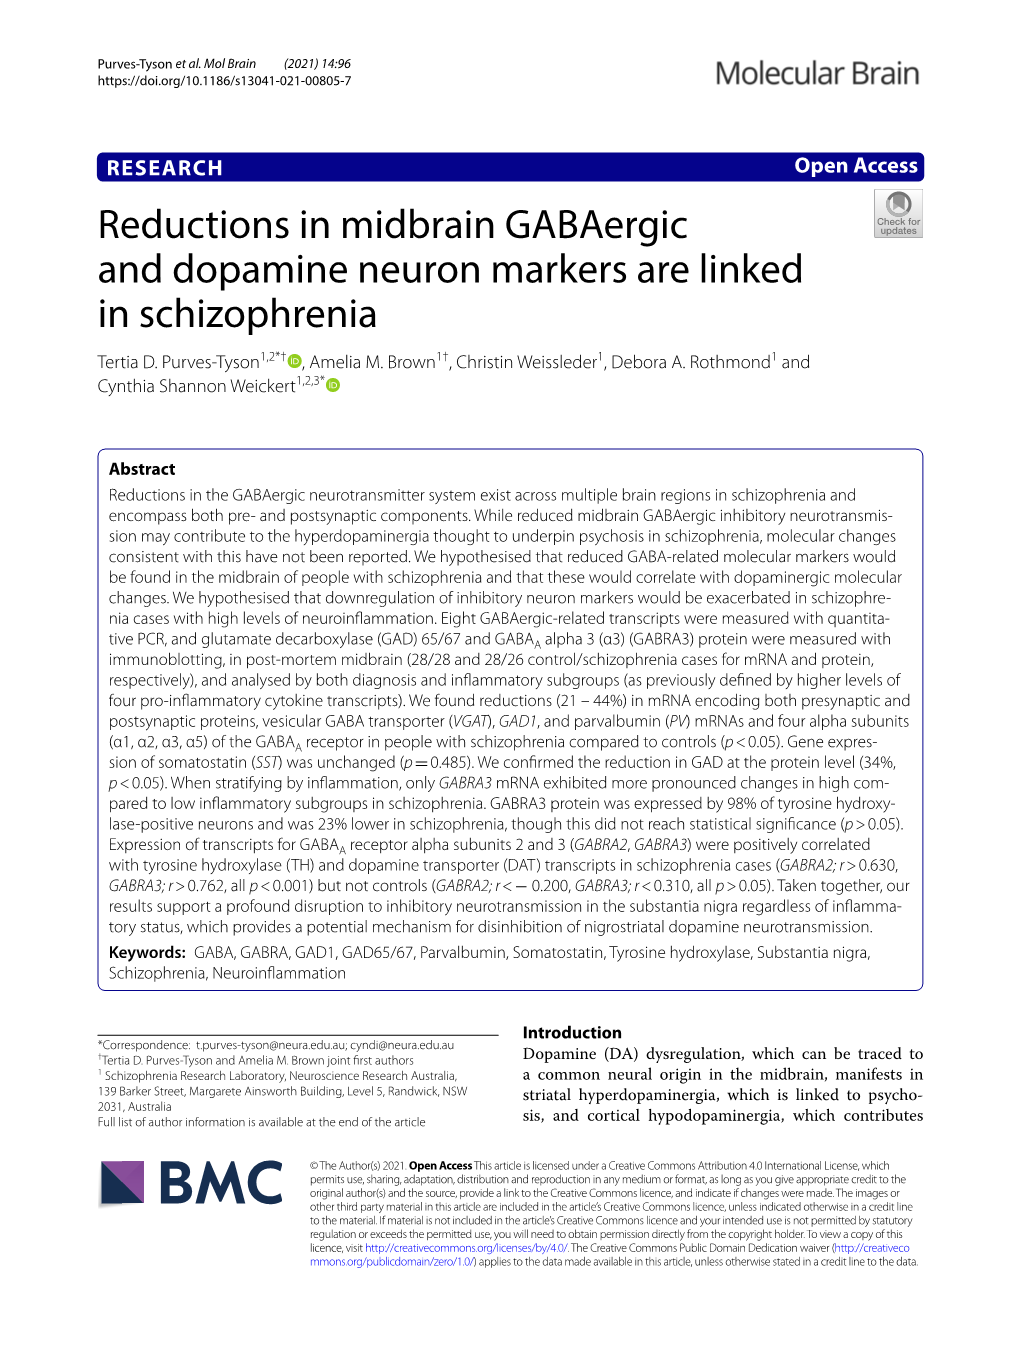 Reductions in Midbrain Gabaergic and Dopamine Neuron Markers Are Linked in Schizophrenia Tertia D